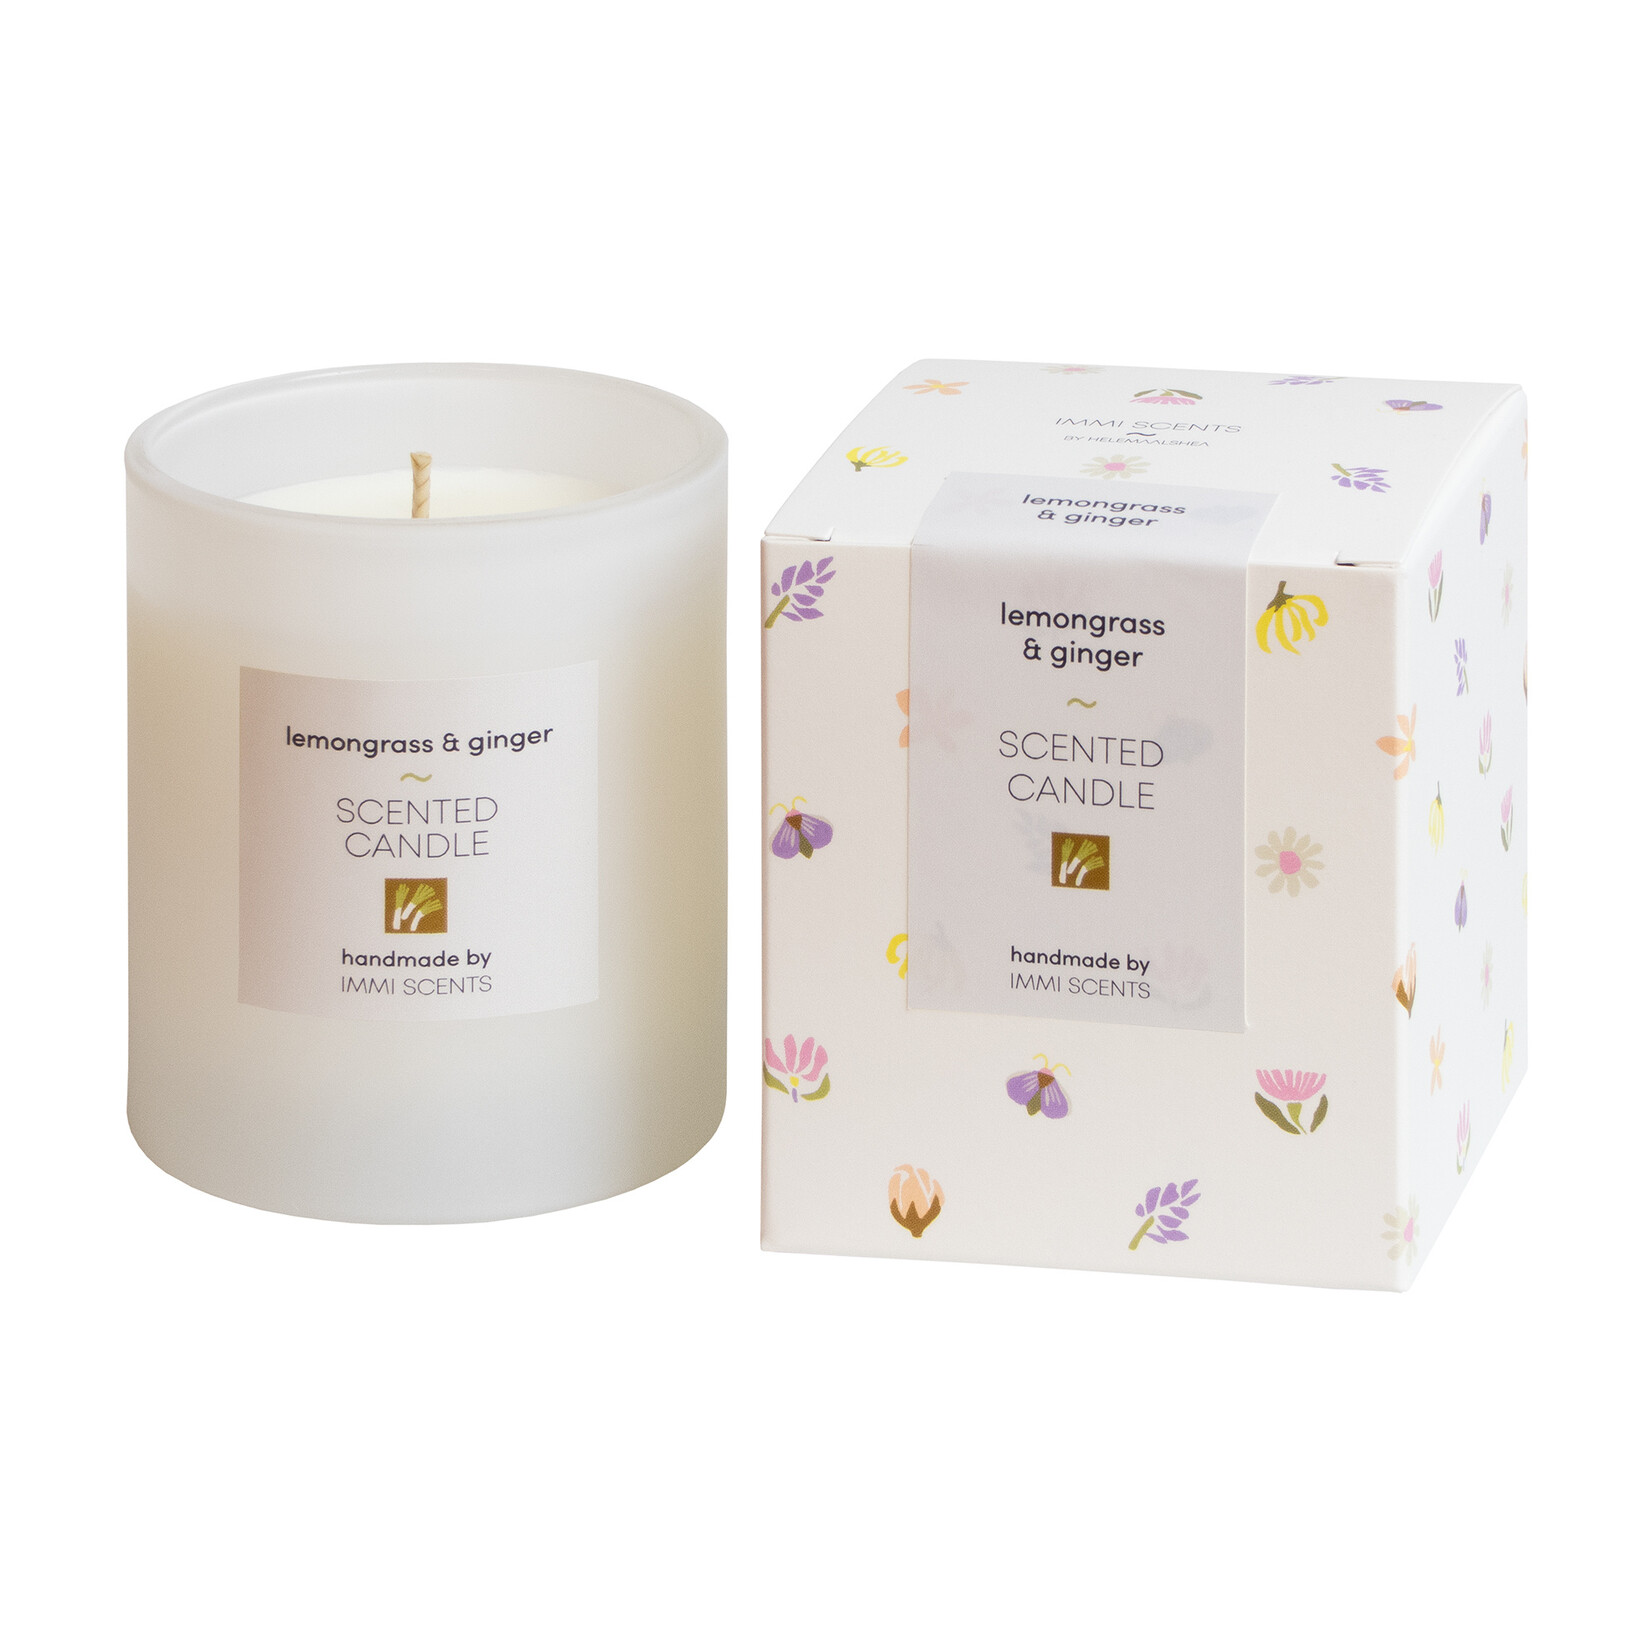 Scented candle - Lemongrass & Ginger - white